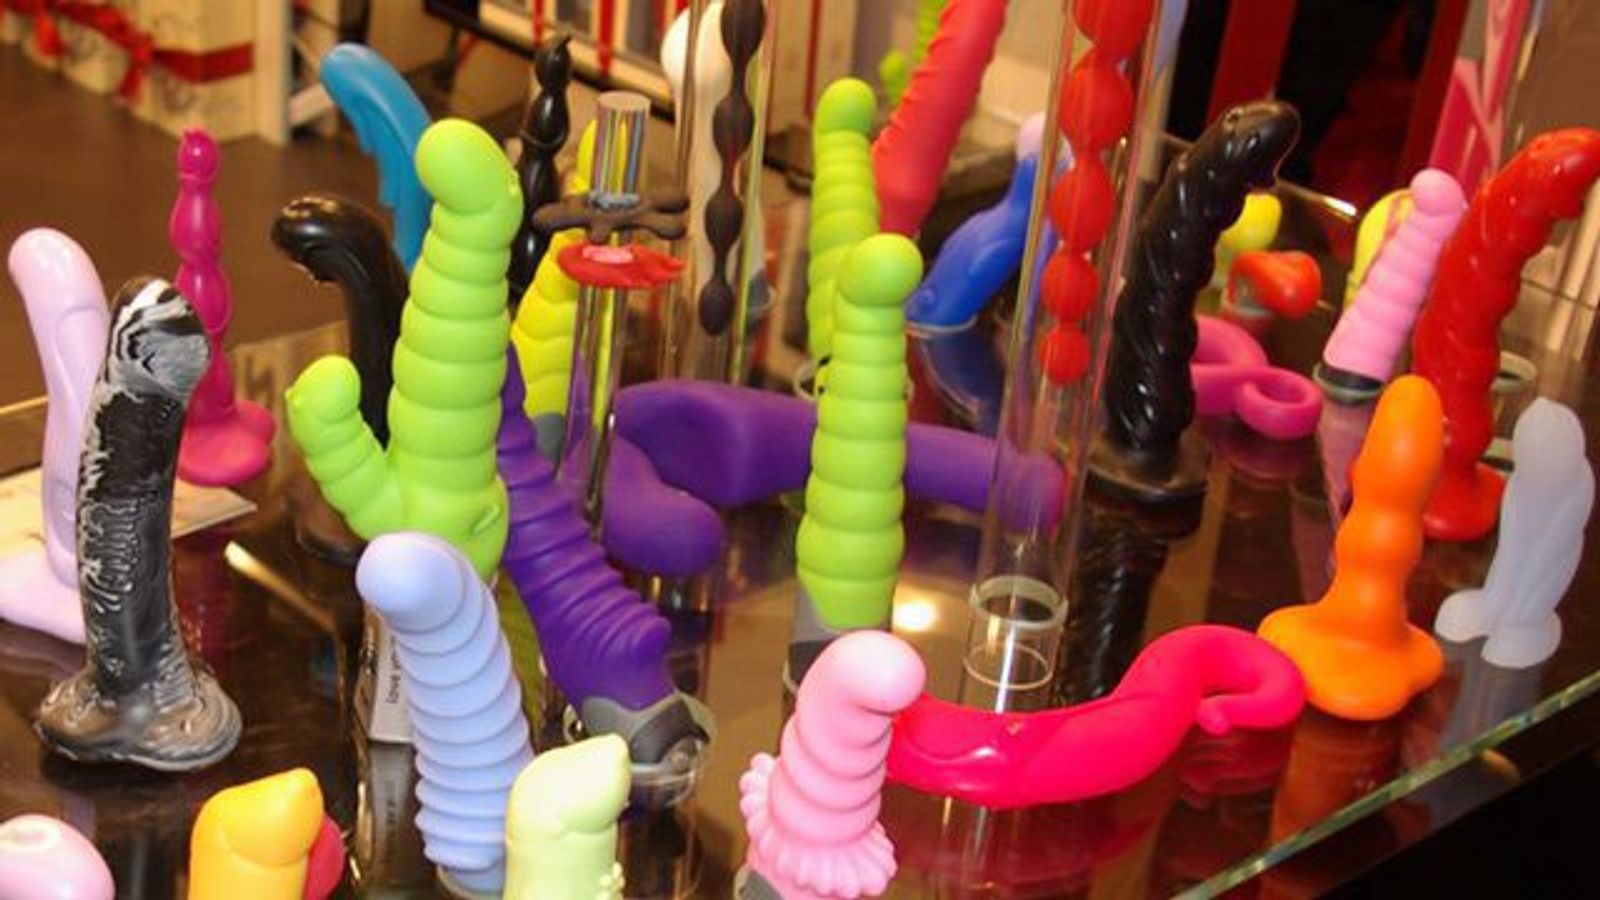 HuffPo Offers Tips For Holiday Vibrator Shopping